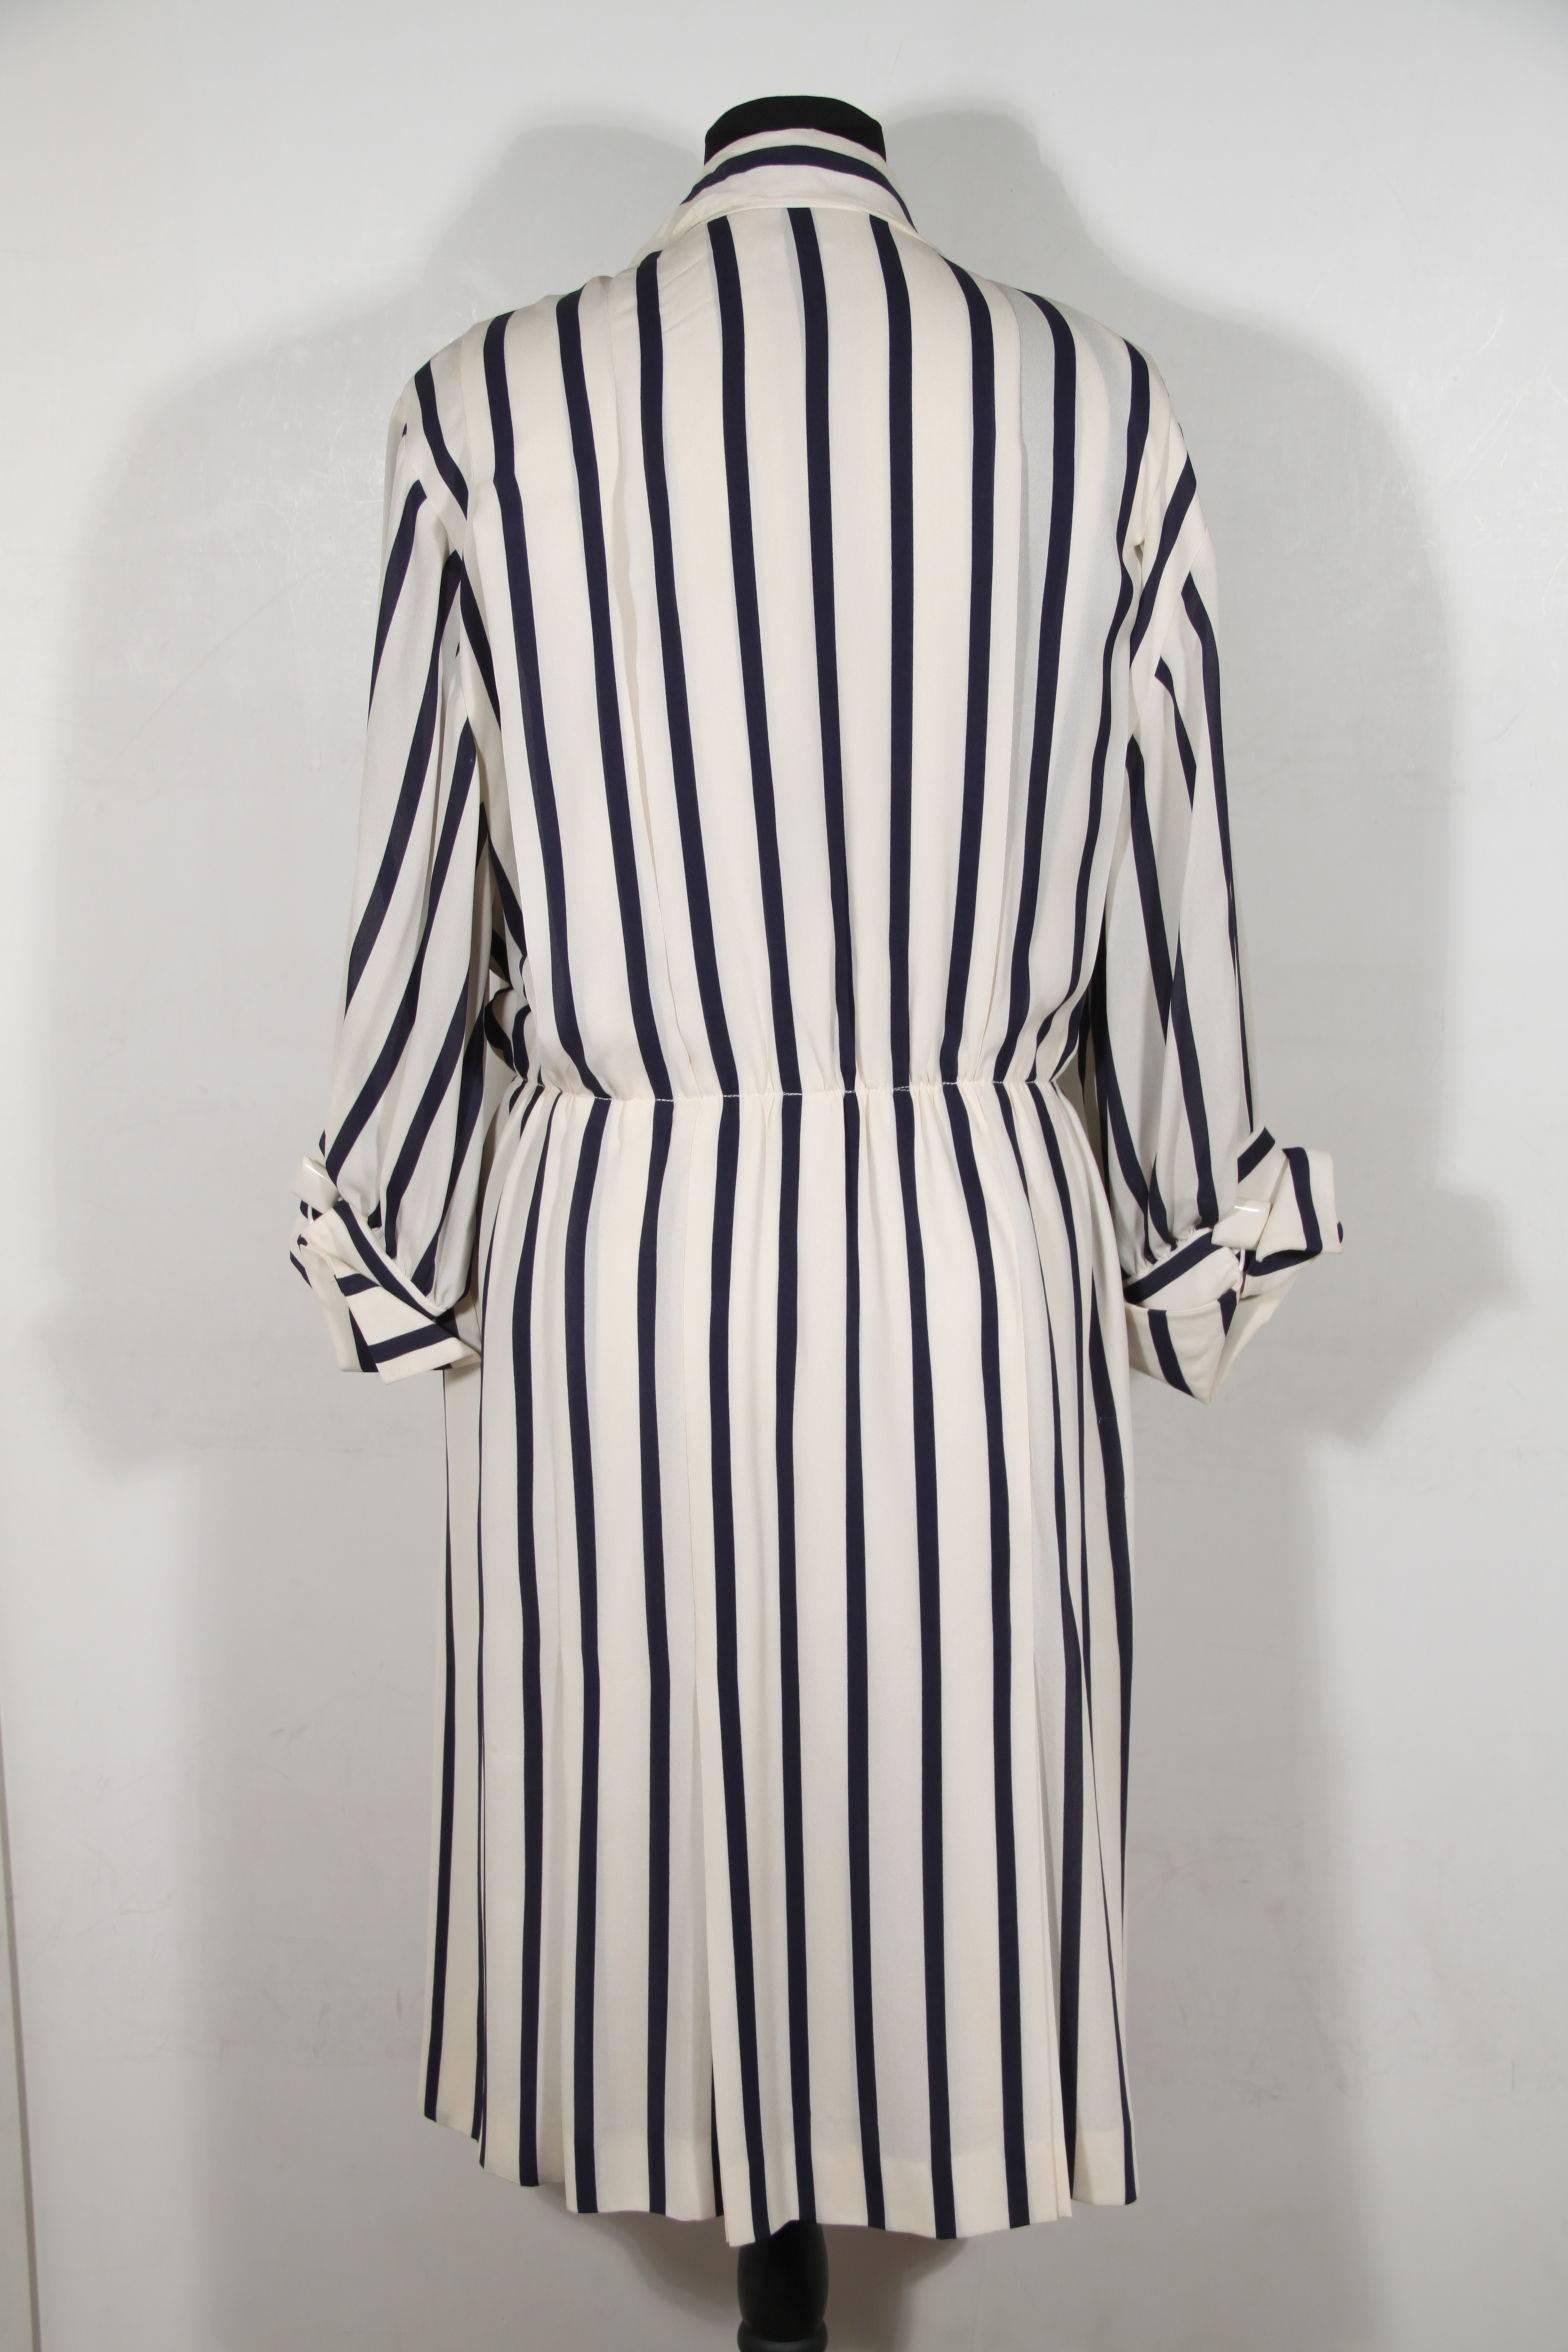 Andrea Odicini Italian Authentic Vintage White and Navy Striped Shirt Dress 1